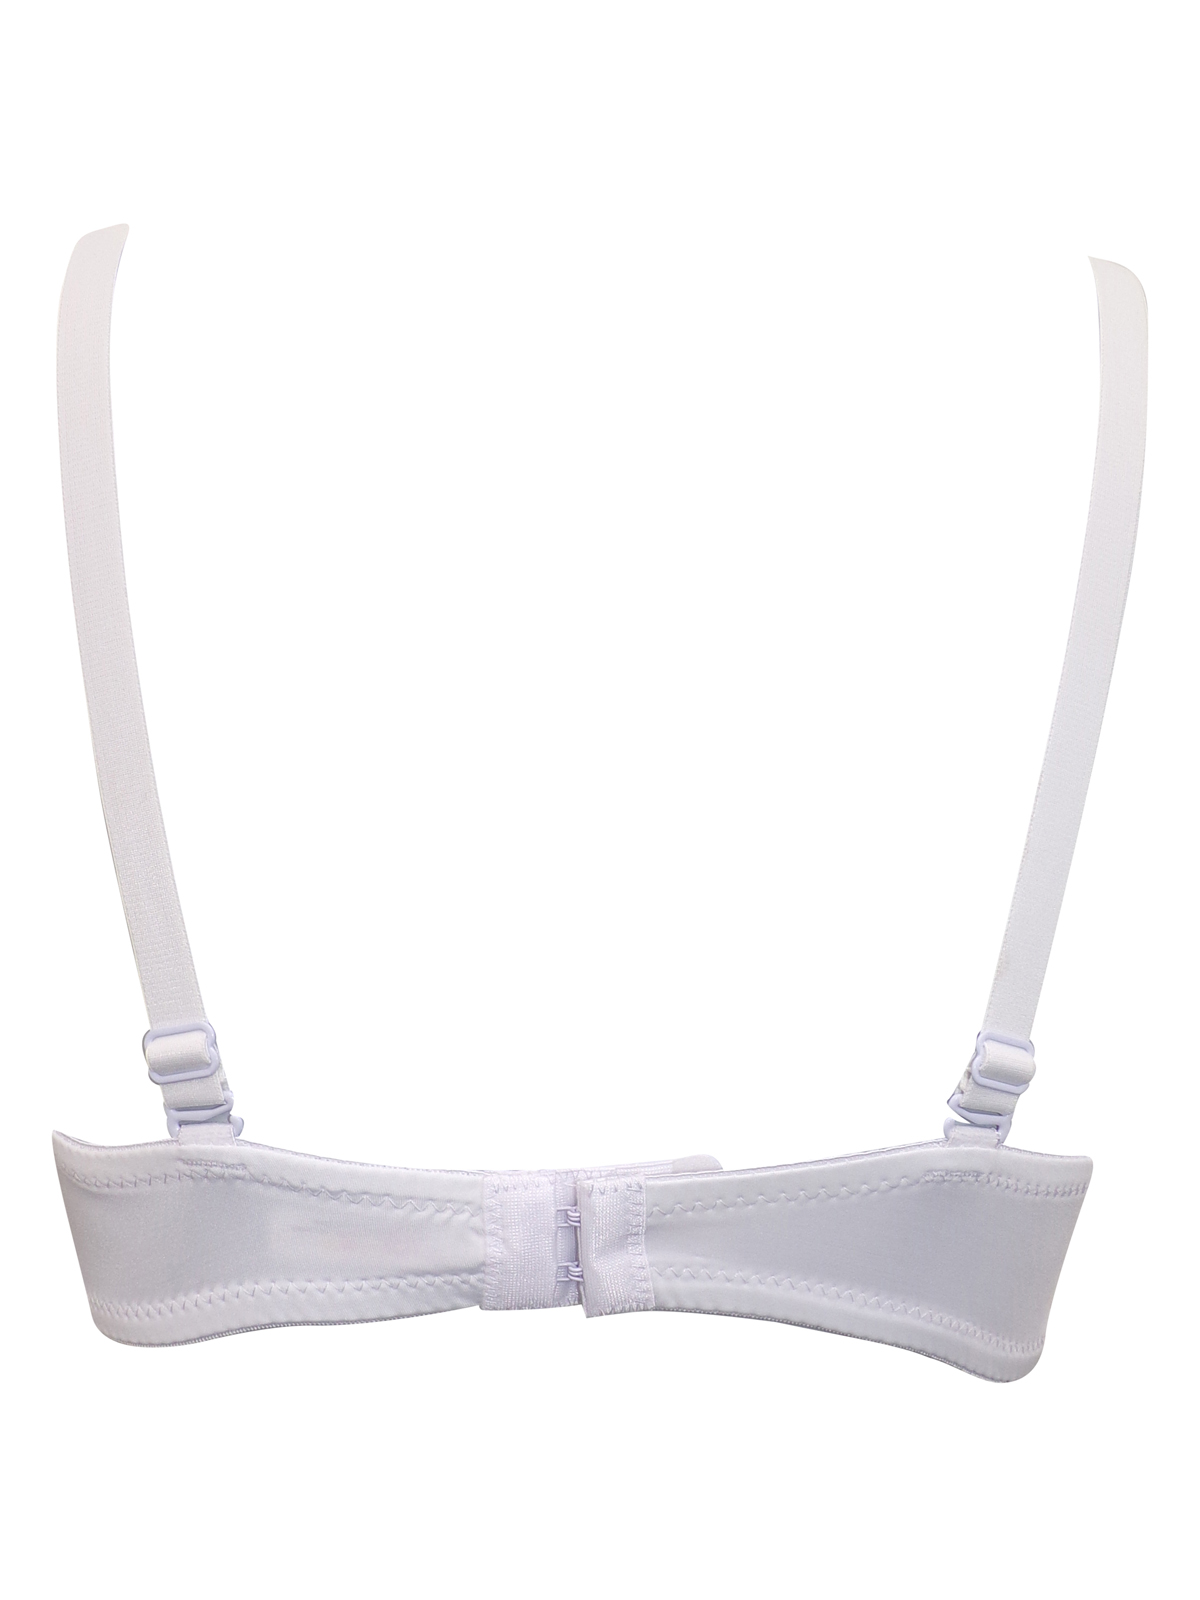 Sentiments - - Sentiments WHITE Padded & Wired Multiway Bra - Size 34 ...